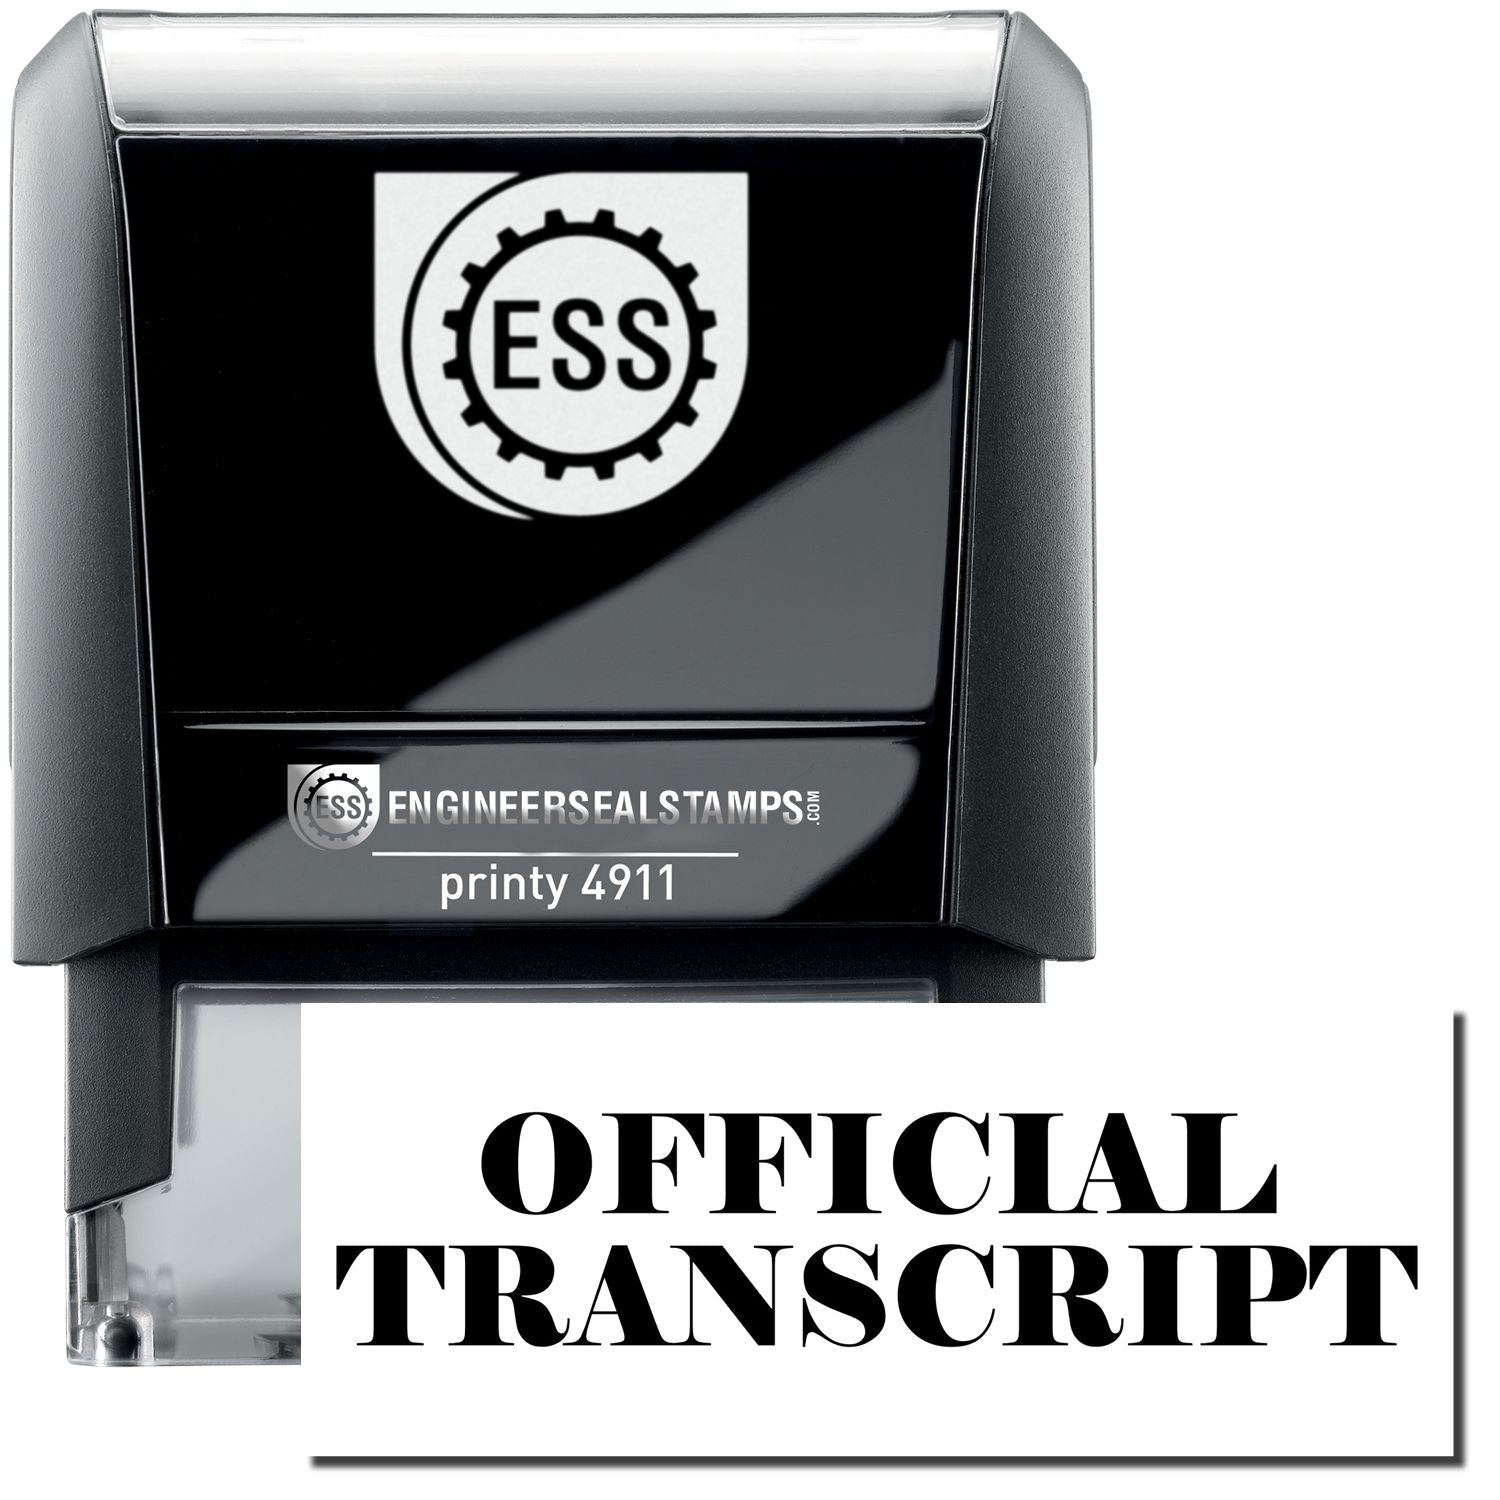 A self-inking stamp with a stamped image showing how the text "OFFICIAL TRANSCRIPT" is displayed after stamping.